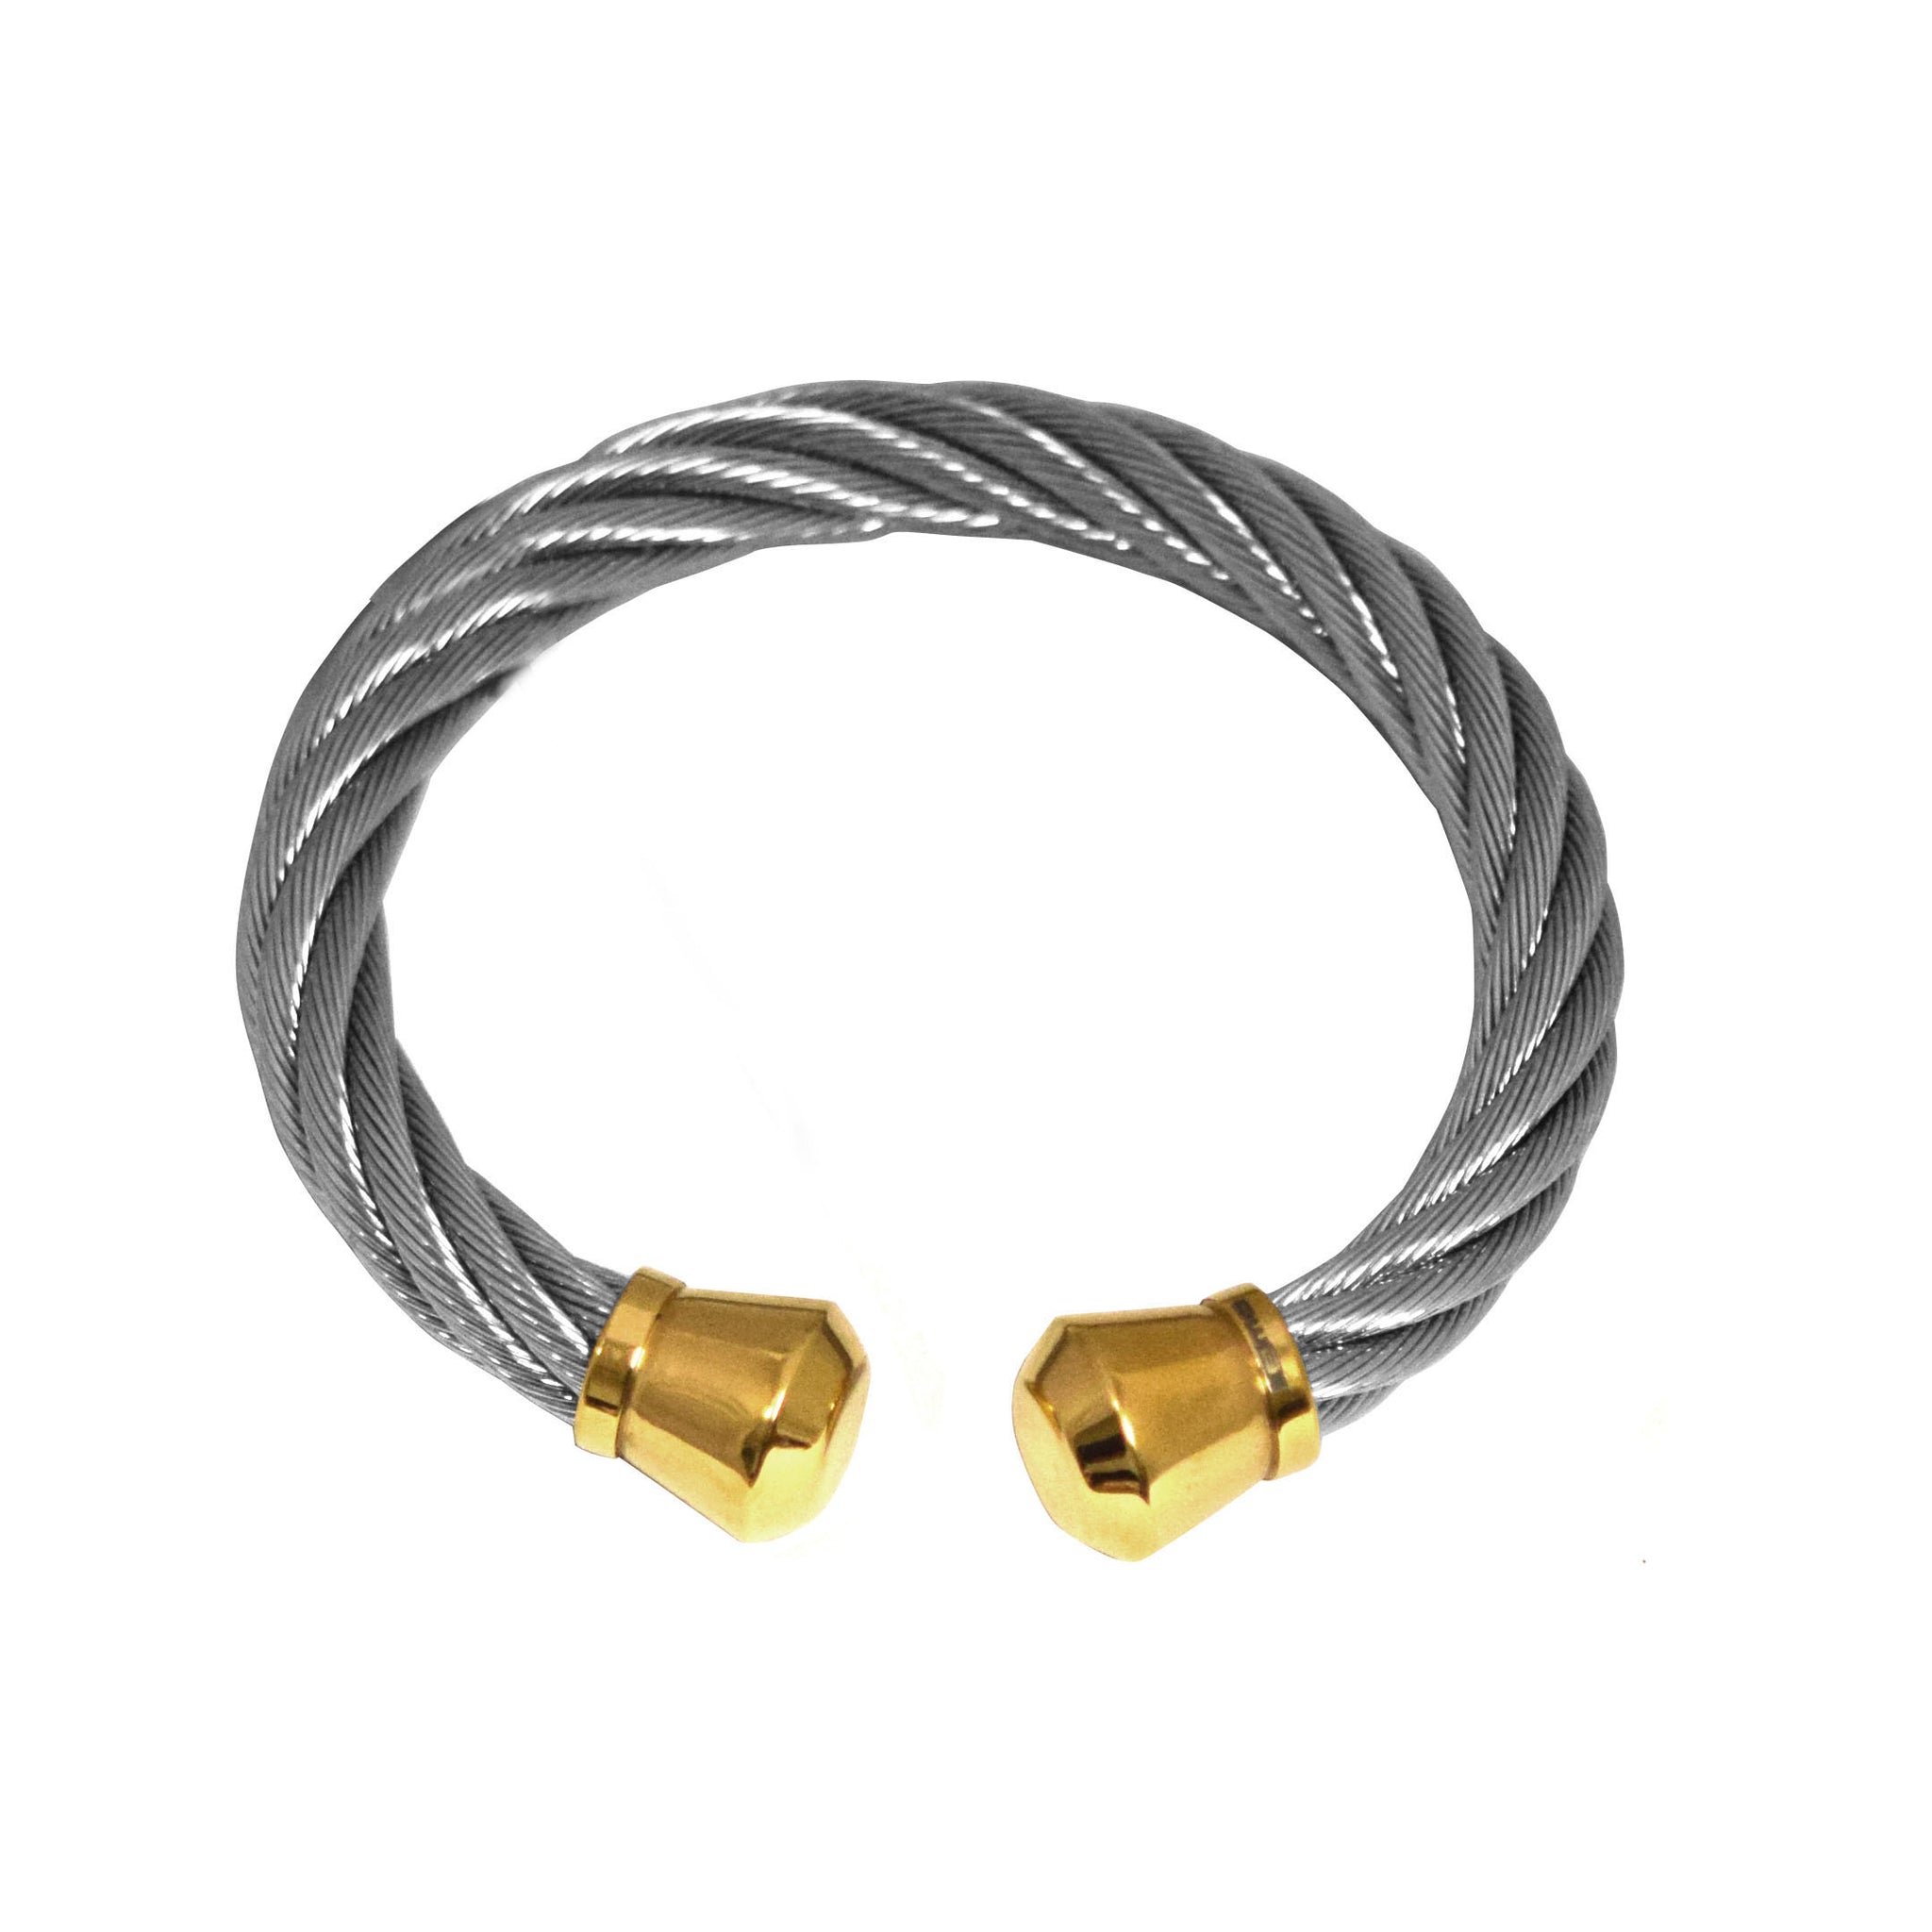 ESBG 5082: Twisted XL Bangle w/ Gold-Plated Drum Ends